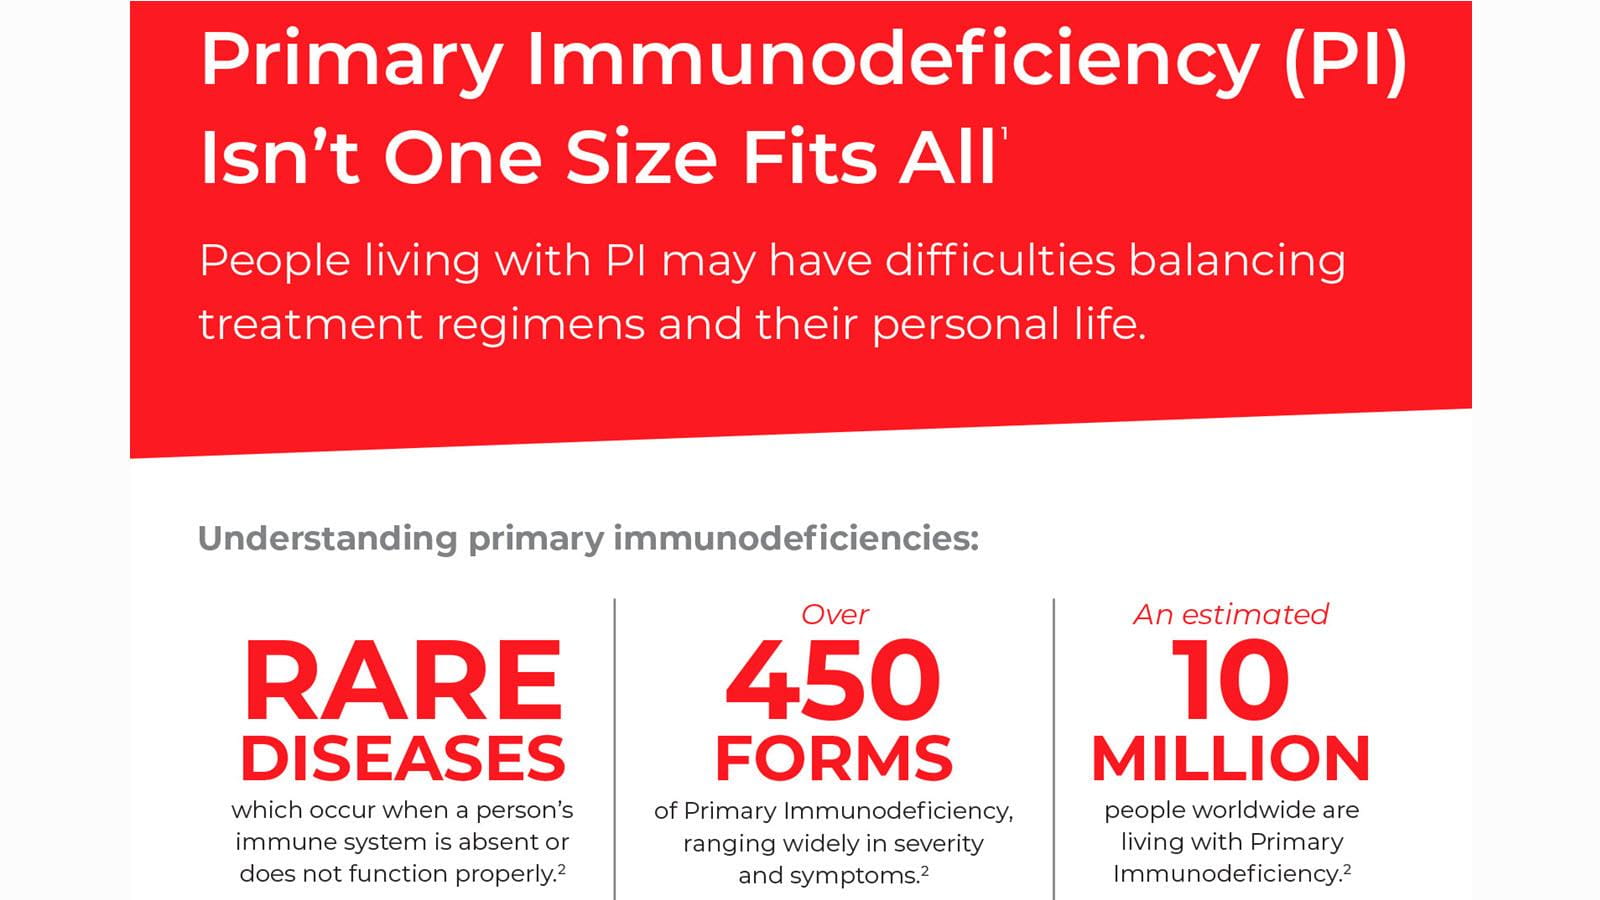 Primary Immunodeficiency (PI) Isn't One Size Fits All Infographic